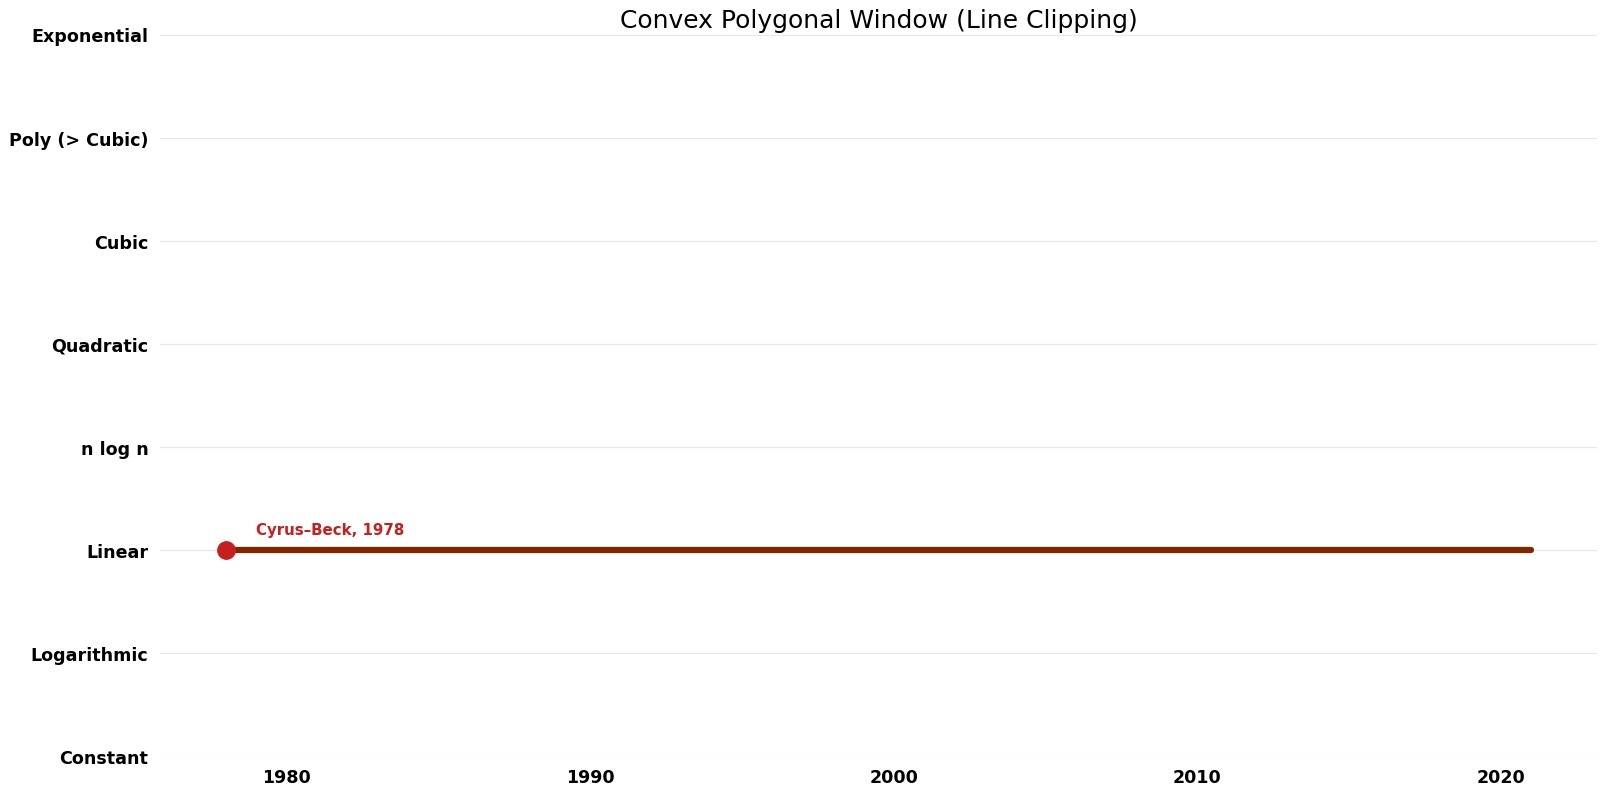 Line Clipping - Convex Polygonal Window - Time.png